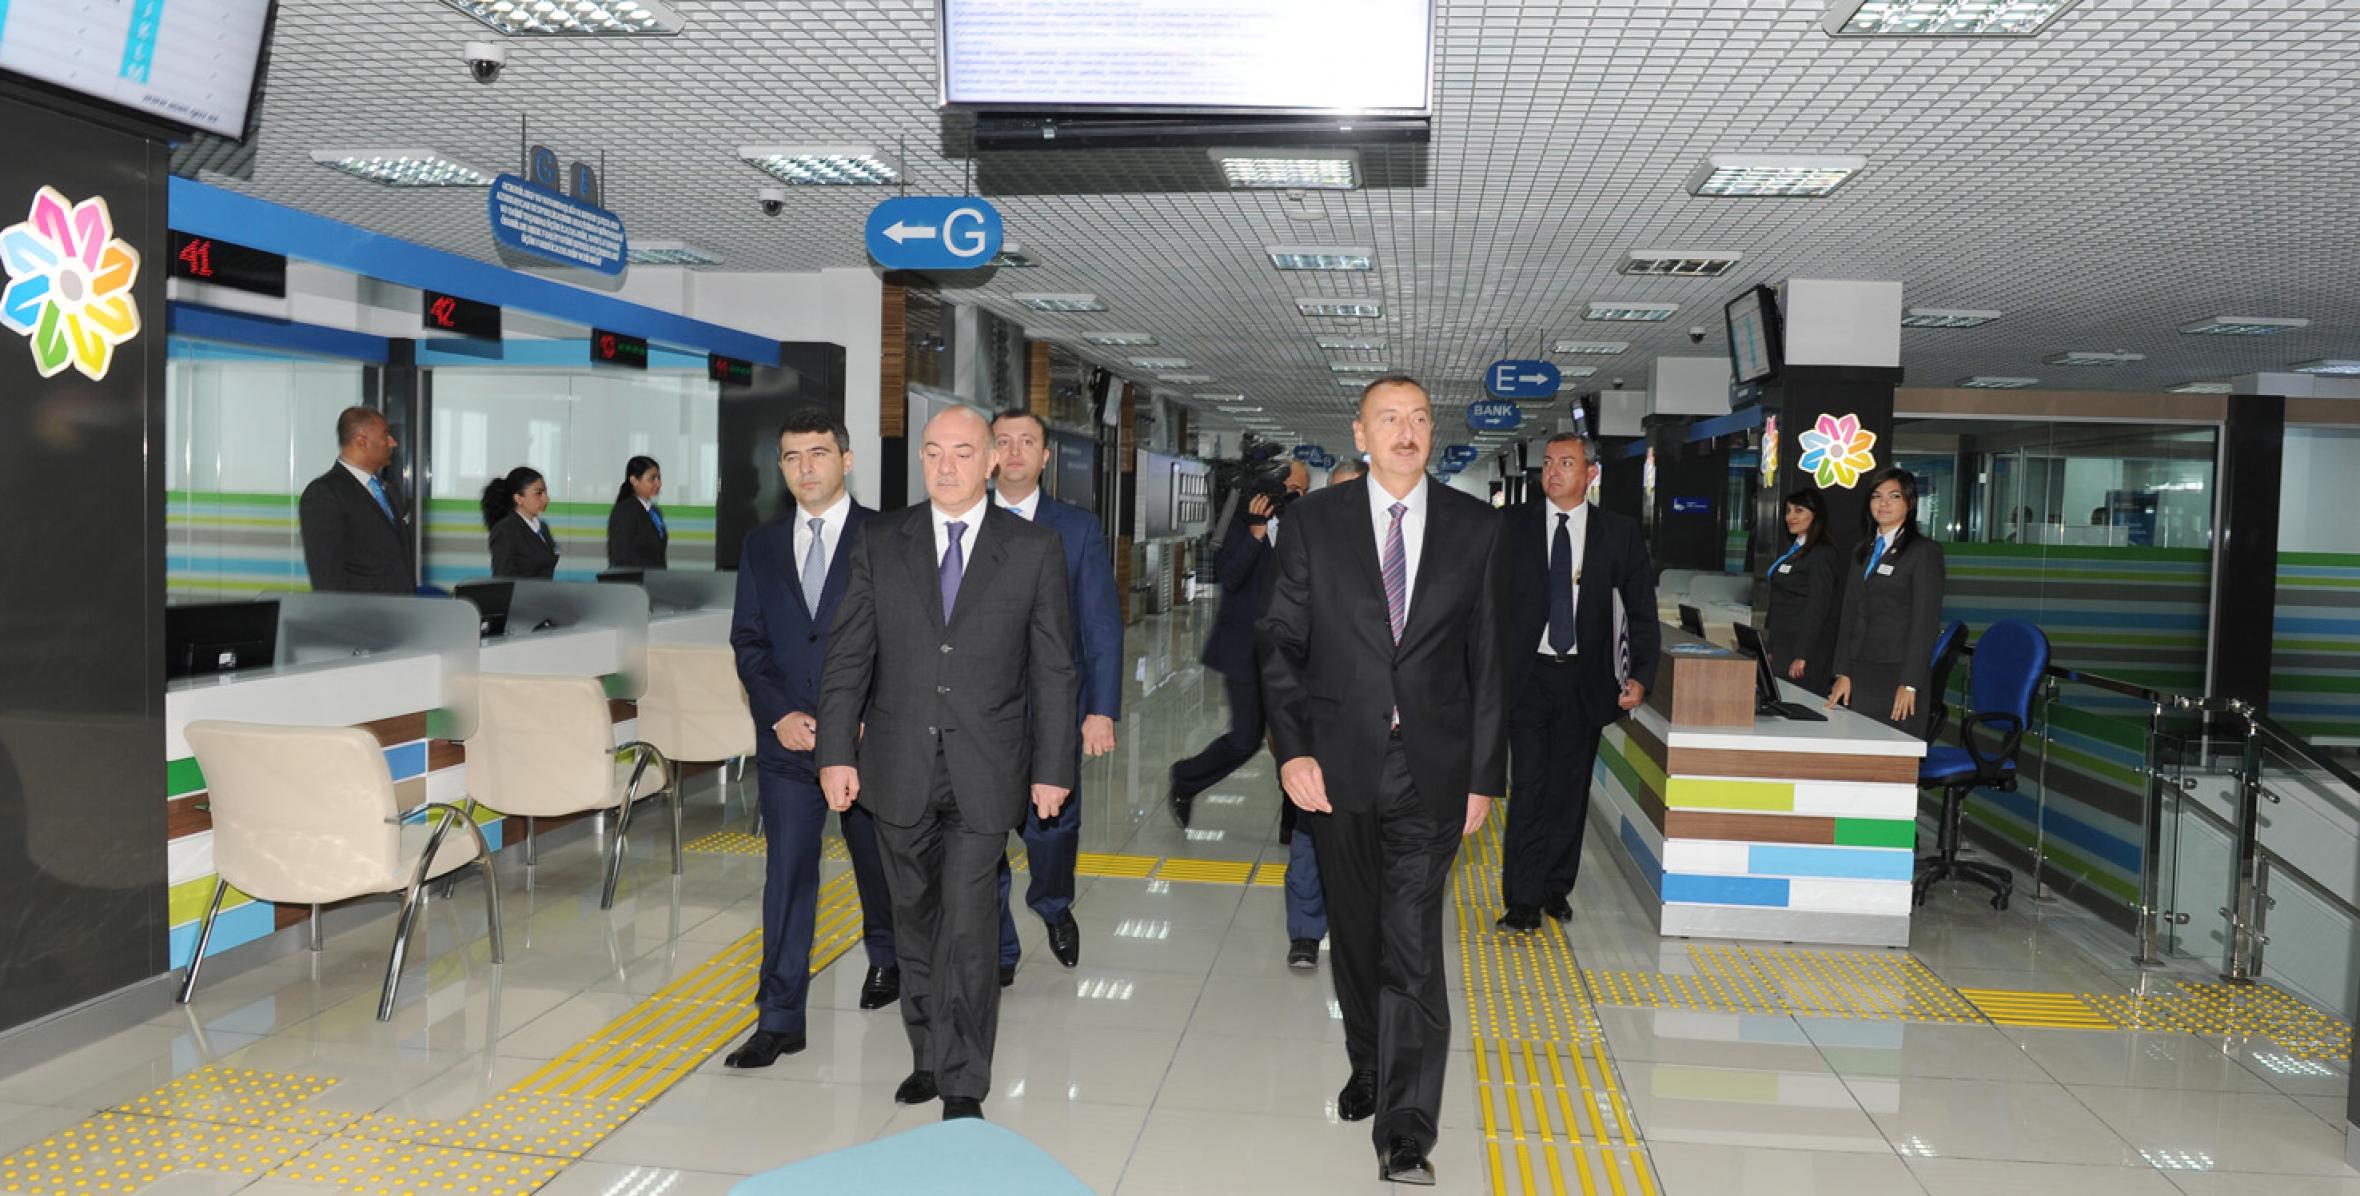 Ilham Aliyev attended the opening of the “ASAN Xidmət” Center No 3 of the State Agency for Public Services and Social Innovation